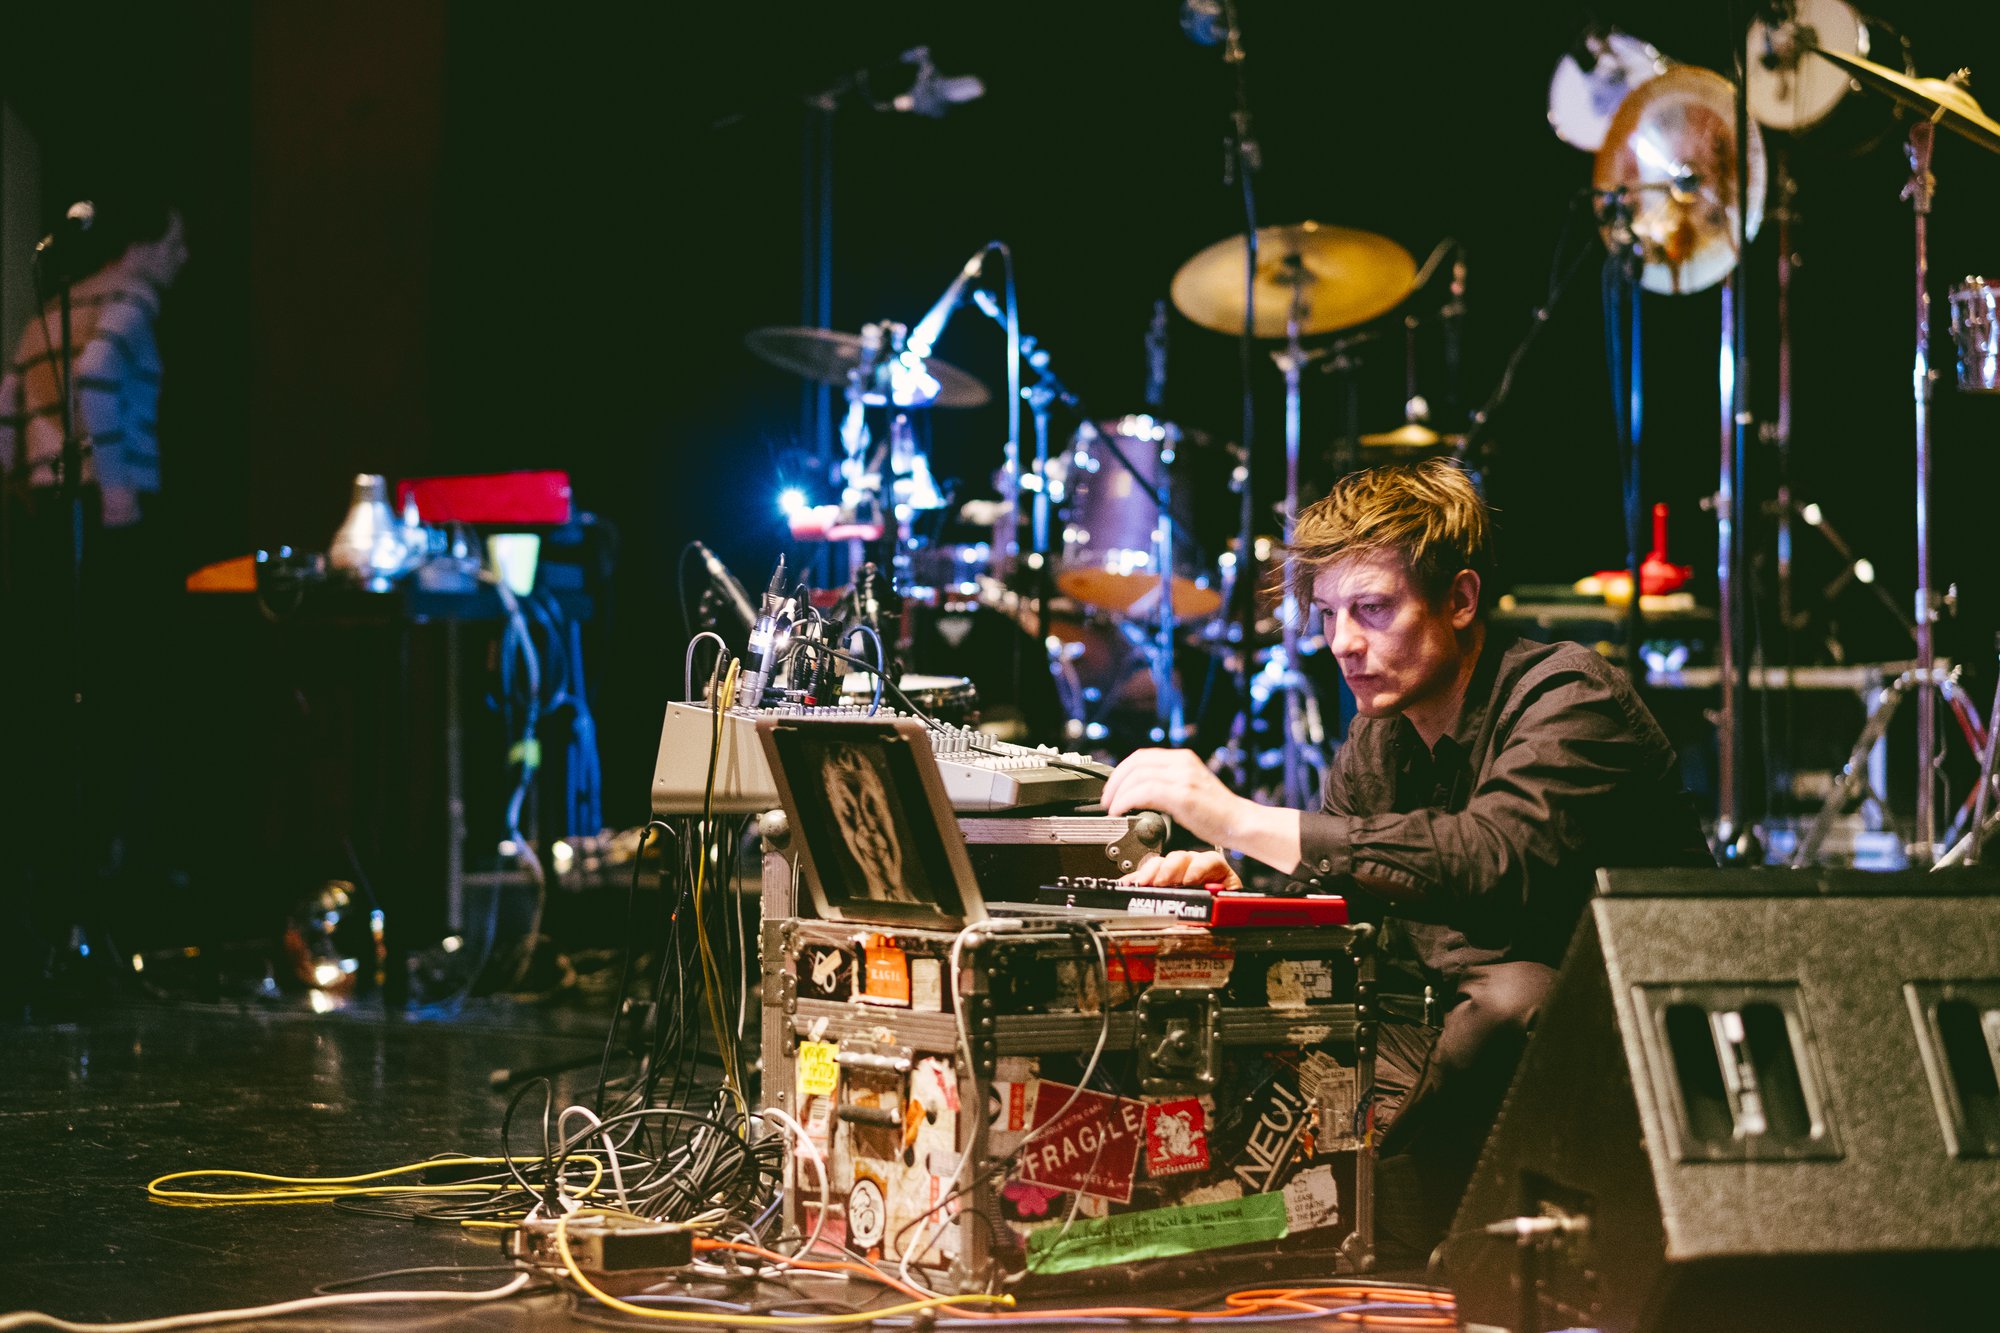 MOUSE ON MARS | Dimensional People | 5 DEC 2018

> Mouse on Mars presented a band of five human elements and some obedient robots to play the album "Dimensional People" on our stage, showing how a great explosion of ideas unfolds.
Photos by Vera Marmelo - Culturgest